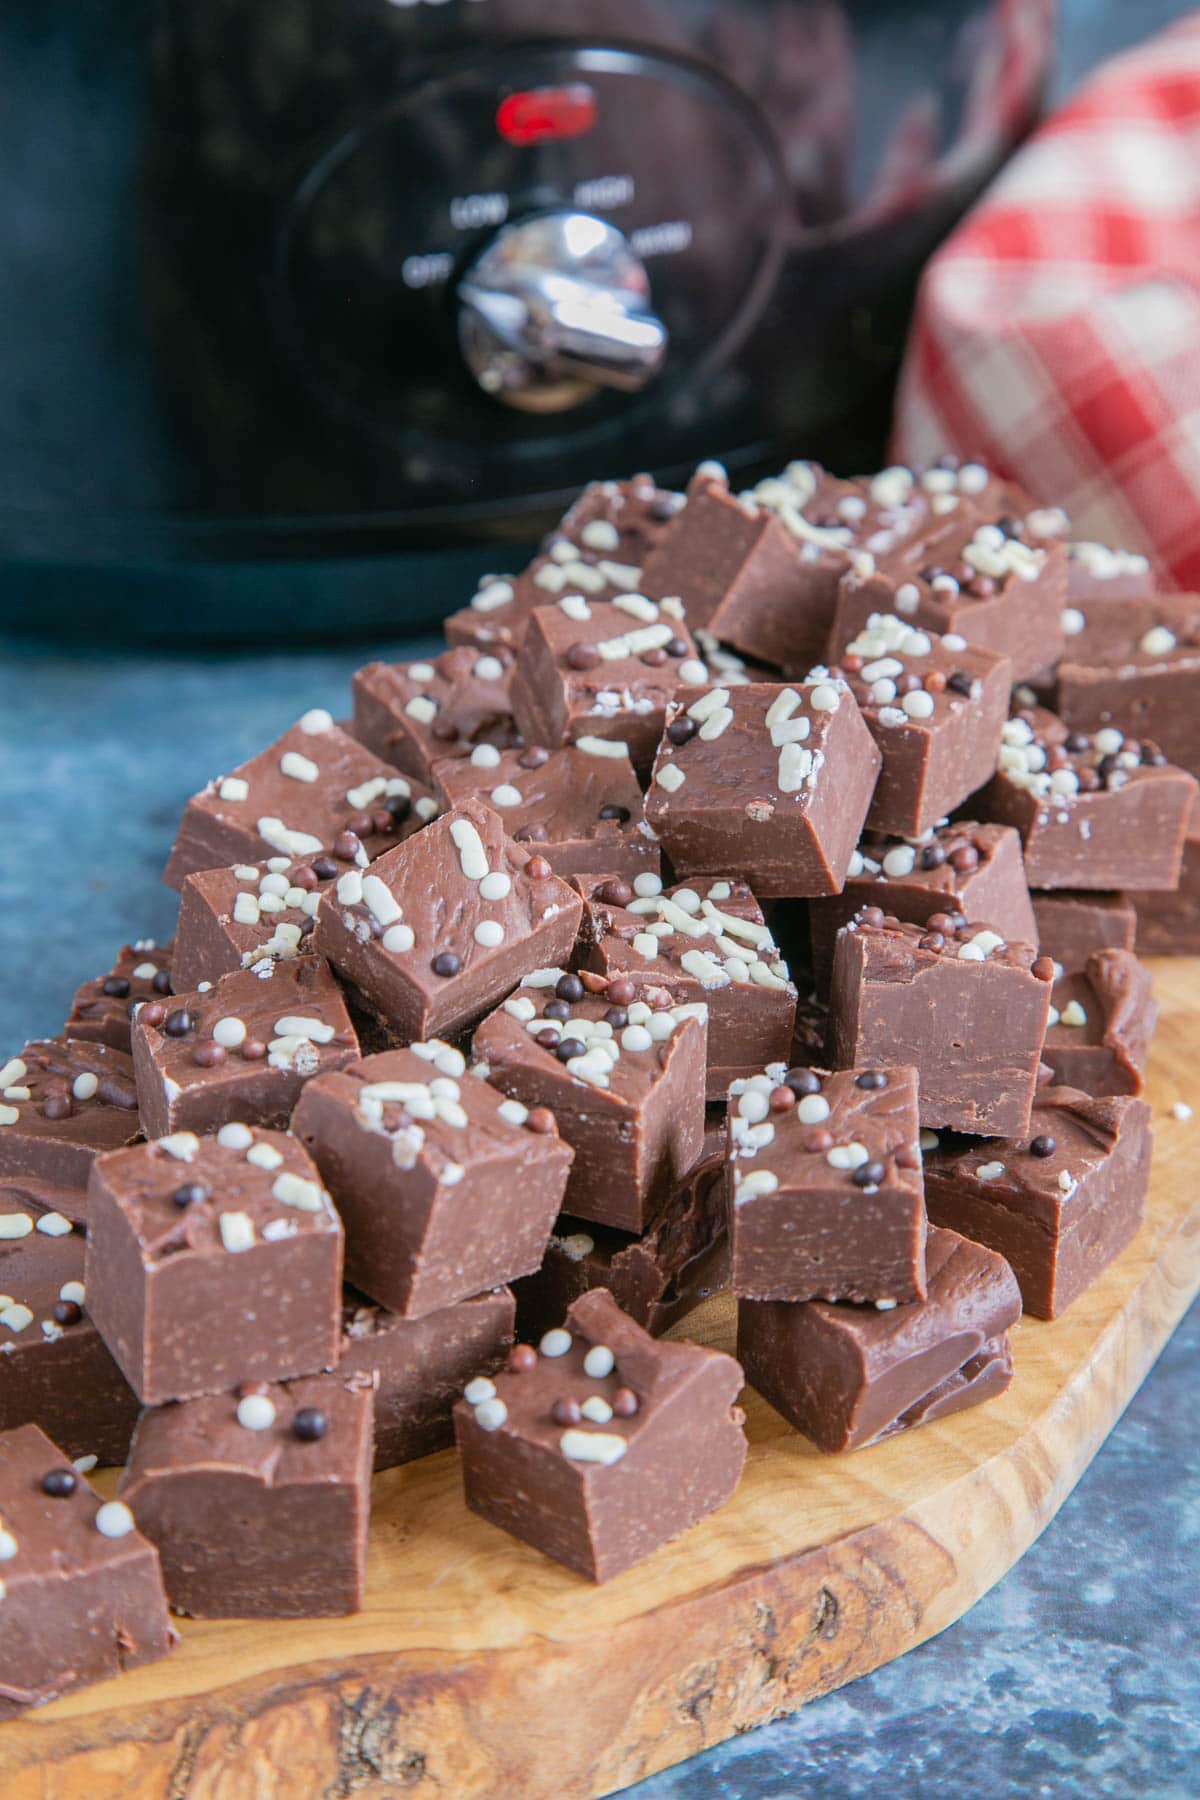 Meltingly soft chocolate fudge, made in the slow cooker and presented on a stylish wooden board.